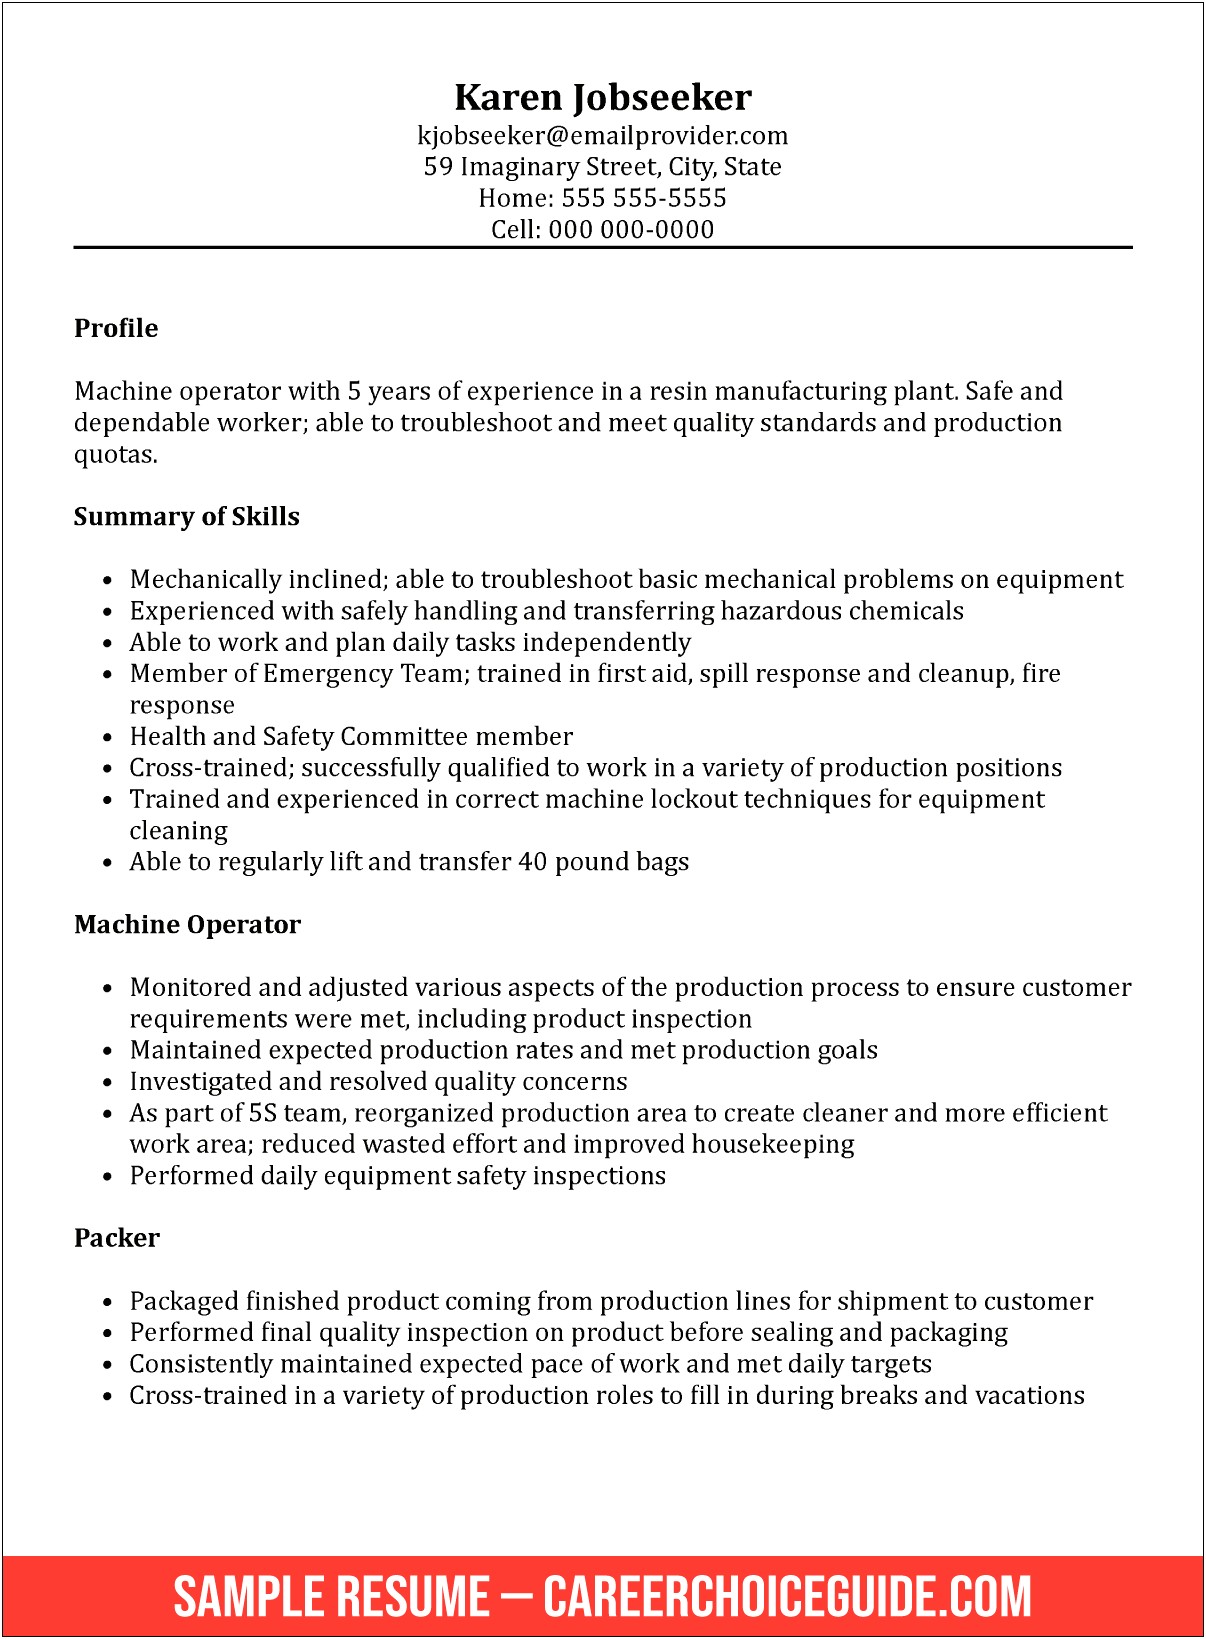 Headline Or Summary For Manufacturing Job Resume